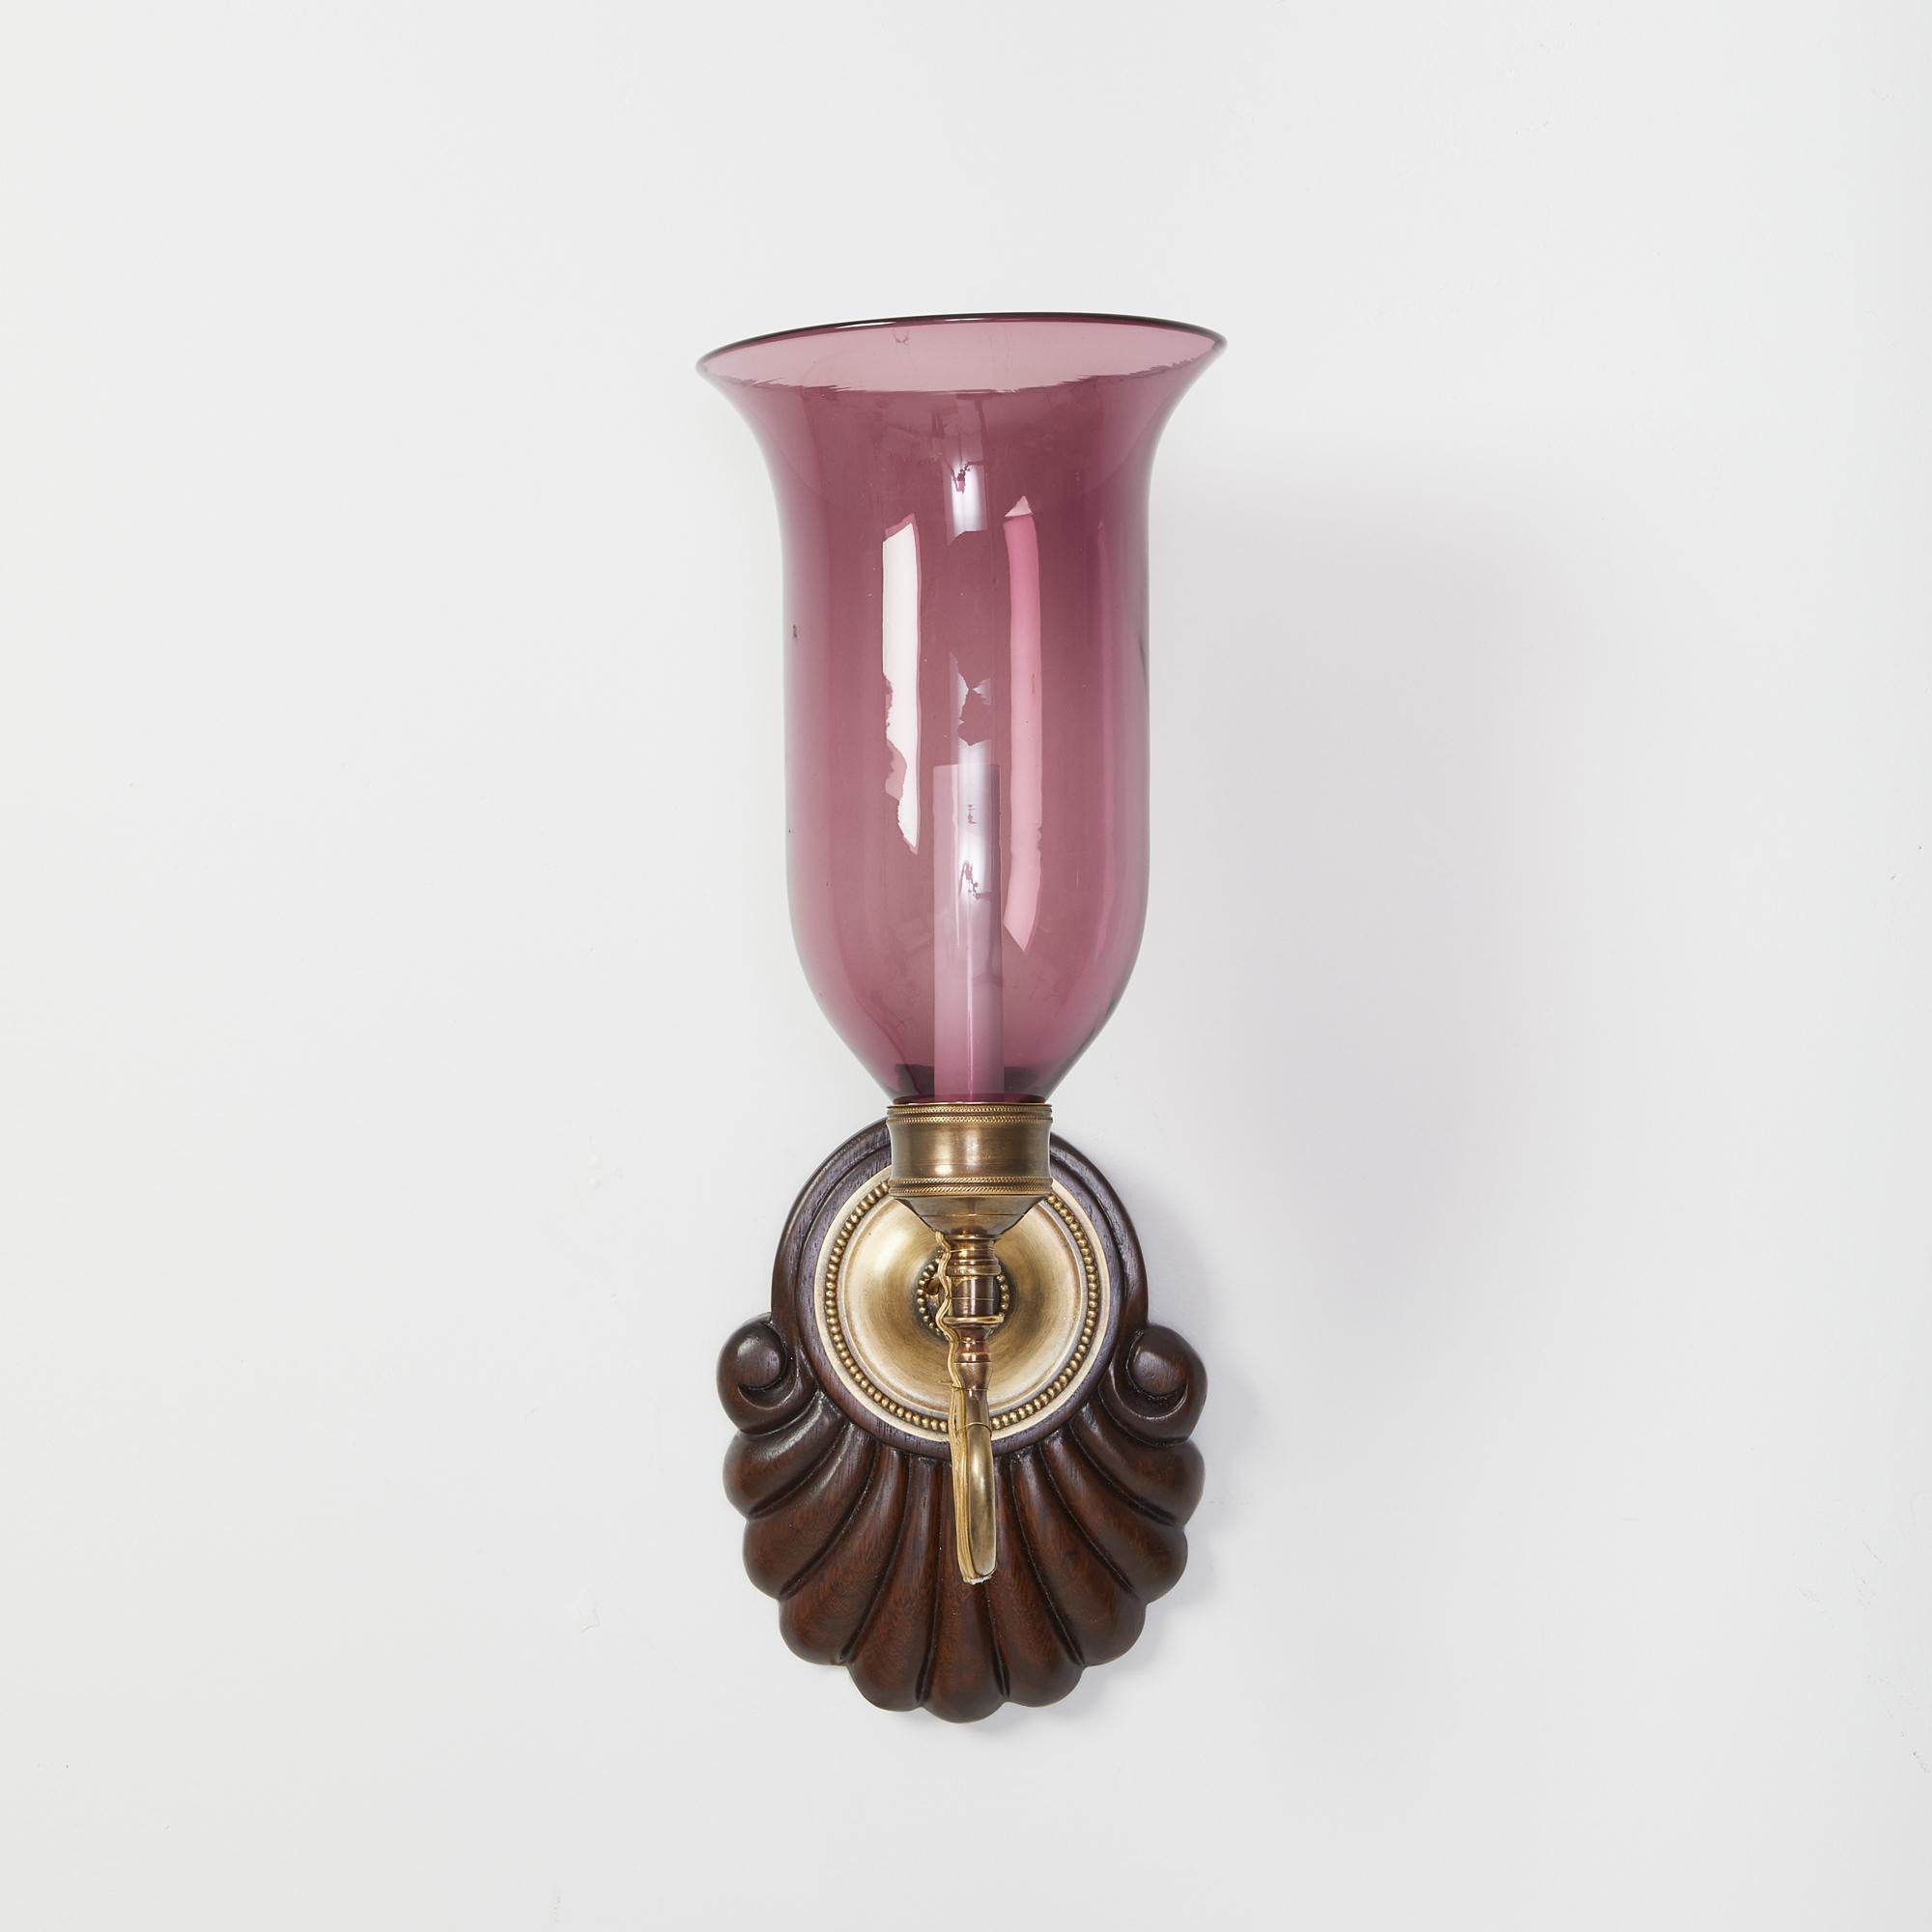 A pair of antique hand-carved shell form mahogany Anglo Indian styled backplates with patinated brass sconce fittings and purple glass flared hurricane shades. Electrified with one candelabra base socket per sconce.

Our custom hurricane sconces are